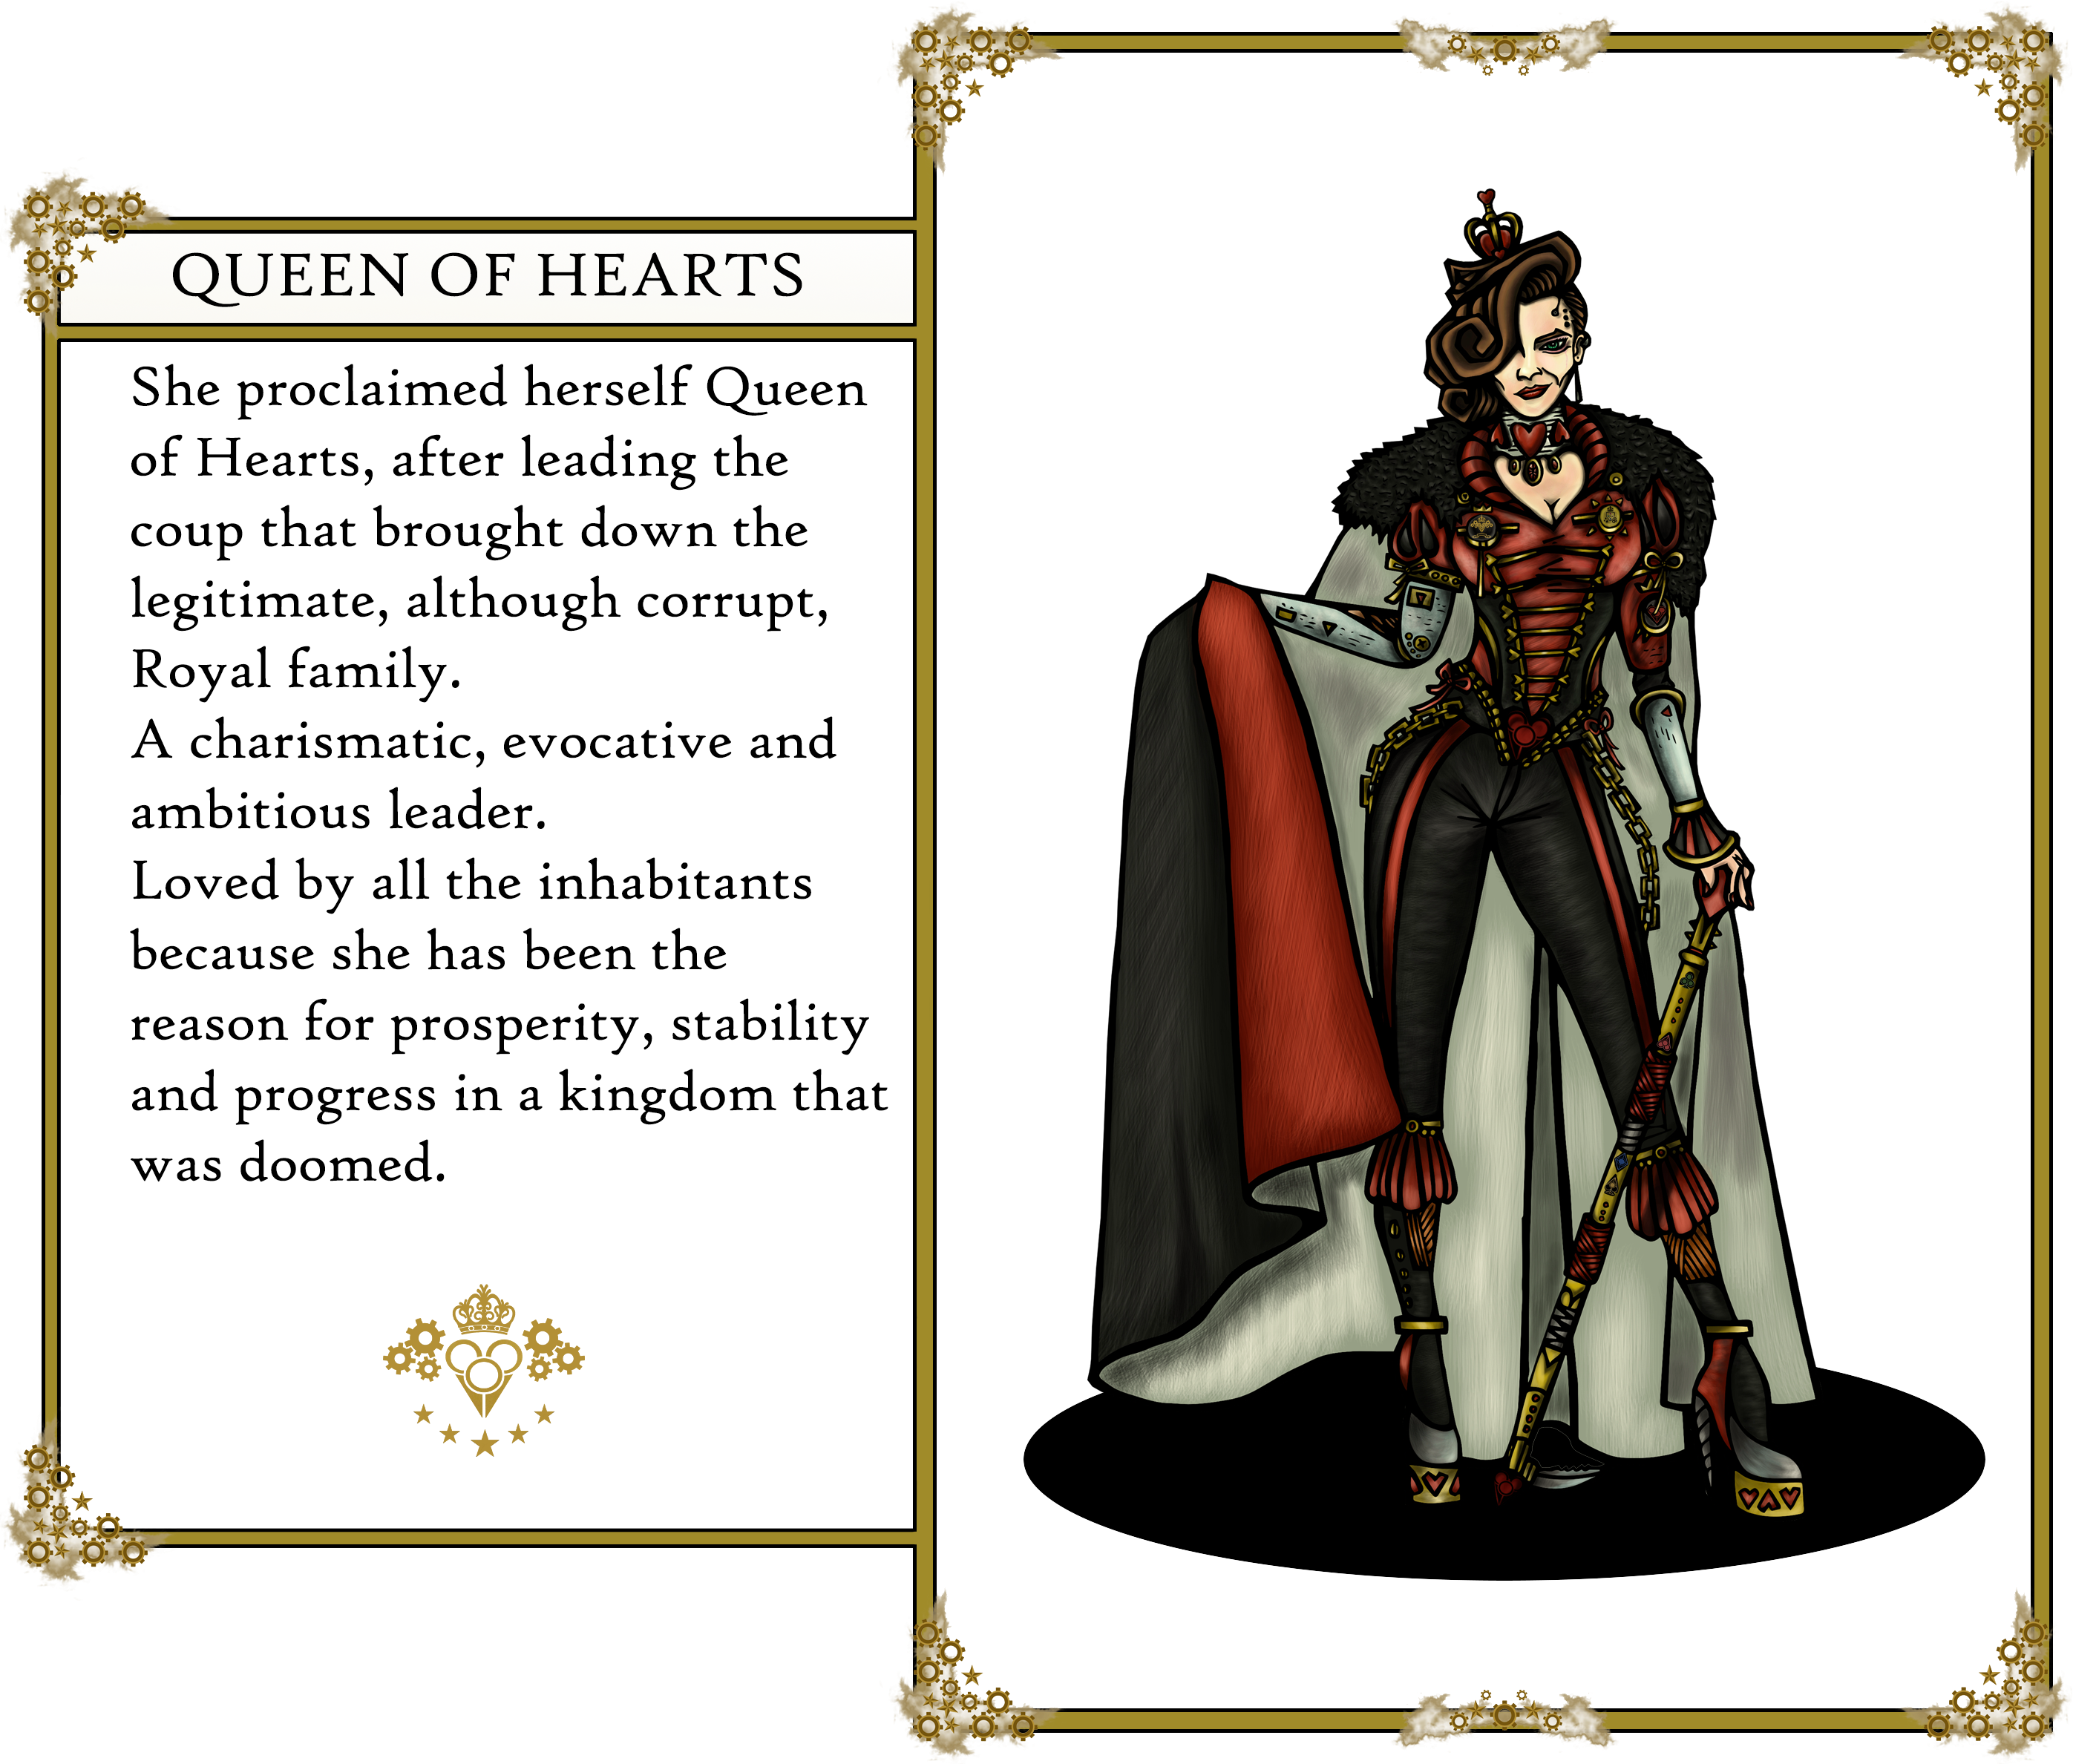 The Oz's tales. Queen of Hearts: 
                        She proclaimed herself Queen of Hearts, after leading the coup that brought down the legitimate, although corrupt, Royal family. 
                        A charismatic, evocative and ambitious leader. Loved by all the inhabitants because she has been the reason for prosperity, 
                        stability and progress in a kingdom that was doomed.